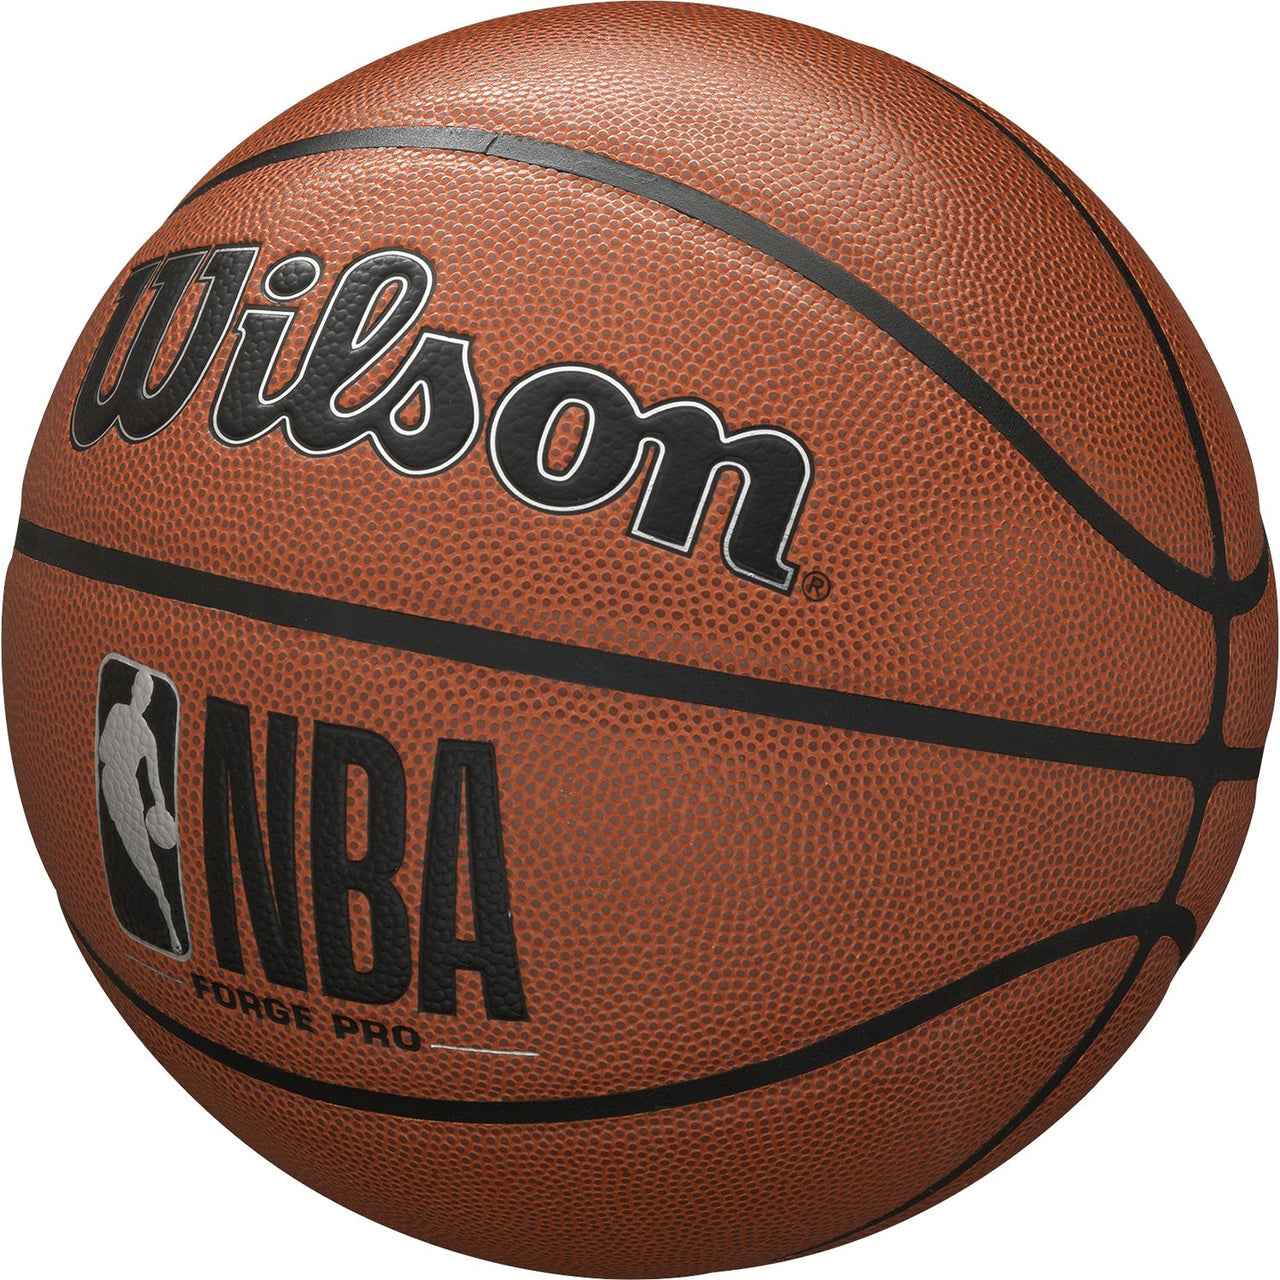 Wilson NBA Forge Pro Official Basketball